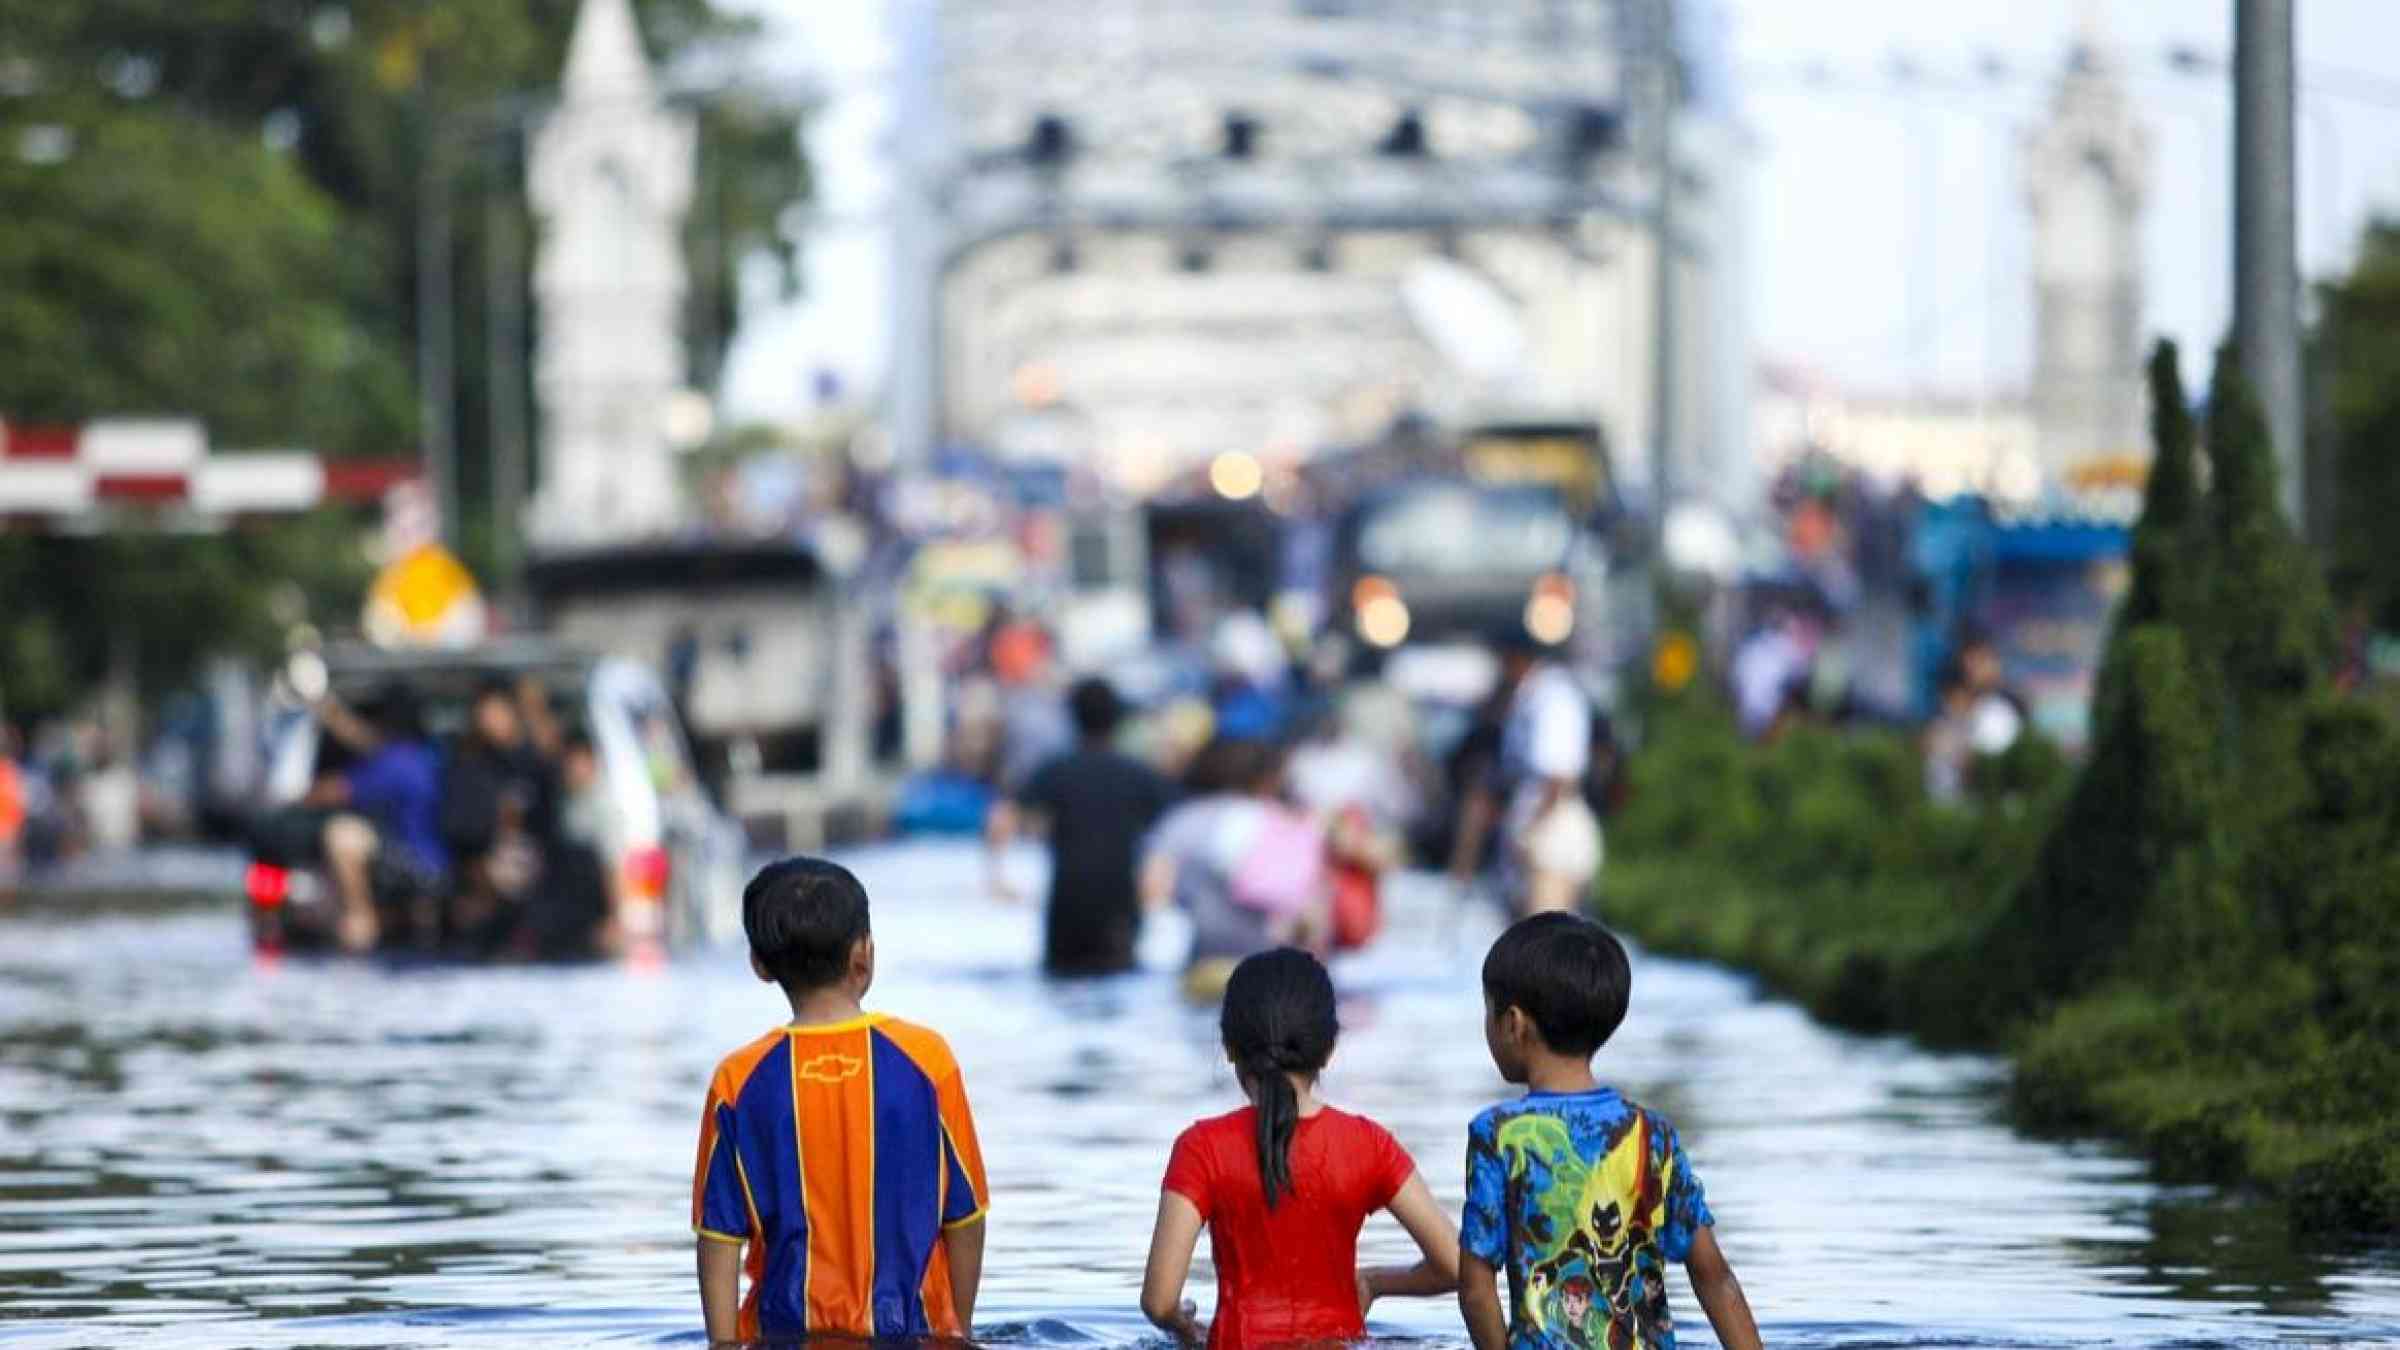 Impact of flooding in Bangkok, Thailand in 2011 - Wutthichai/Shutterstock